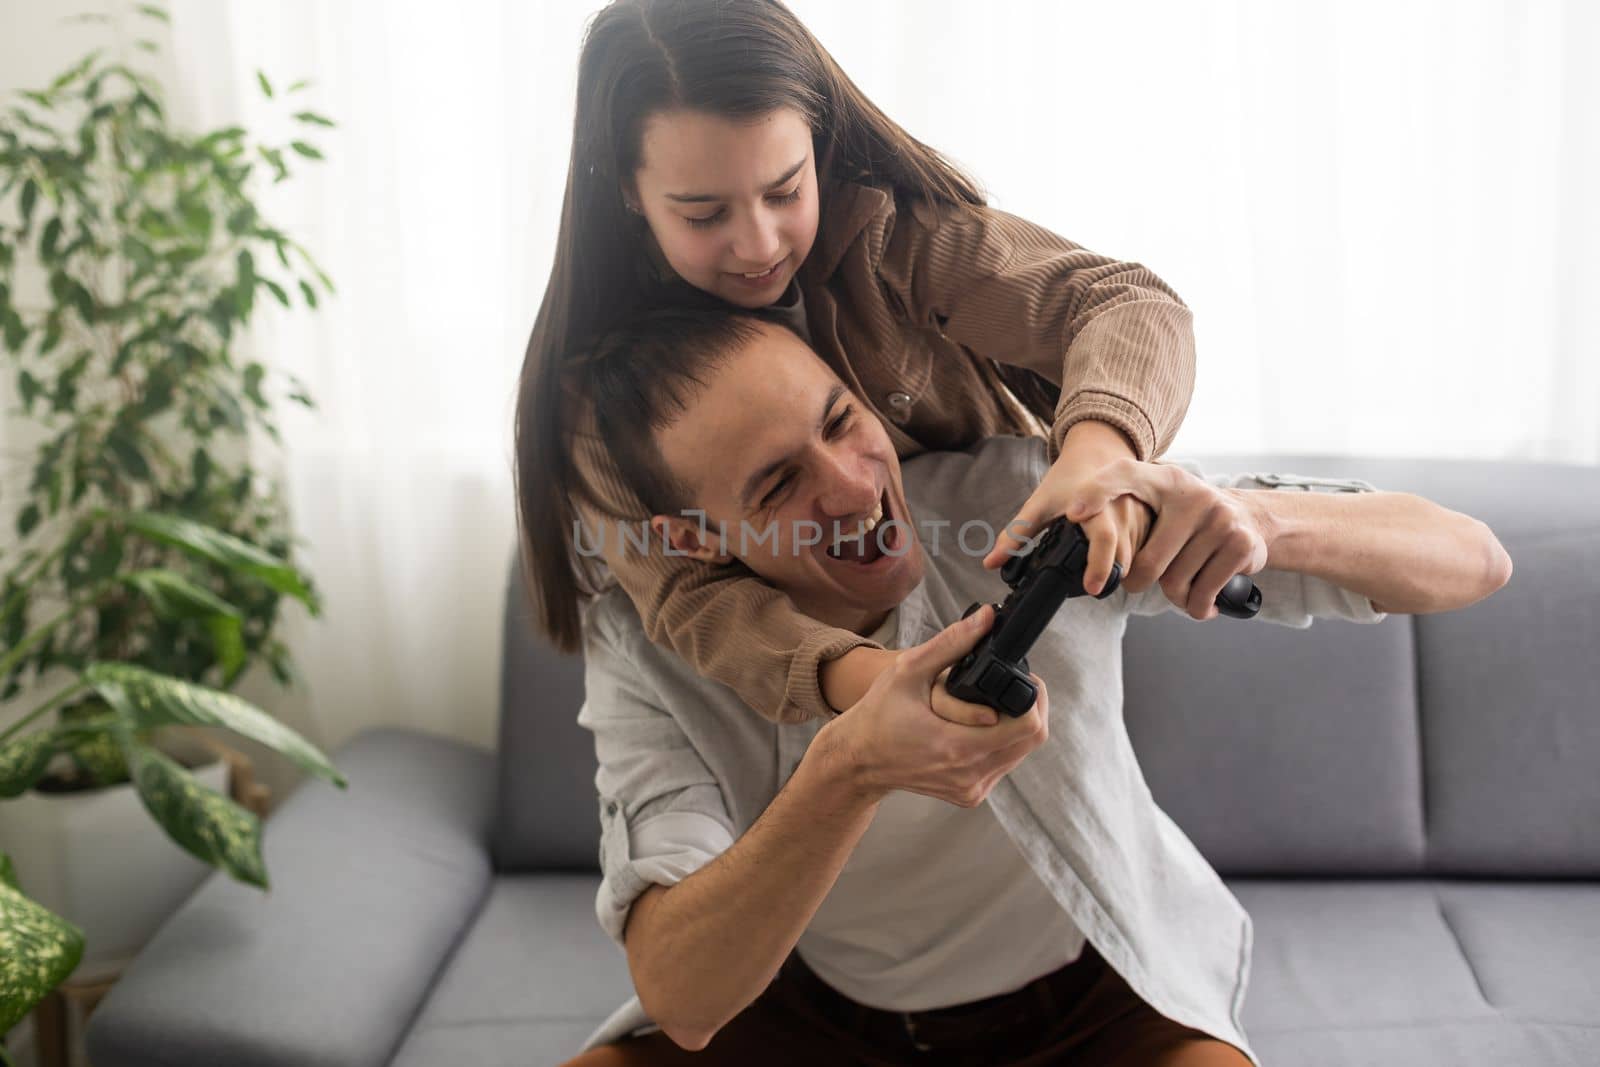 A father and a little daughter play video games using gamepads at home. A man and a child hold game joysticks in their hands. The family is having fun in the bedroom while being quarantined